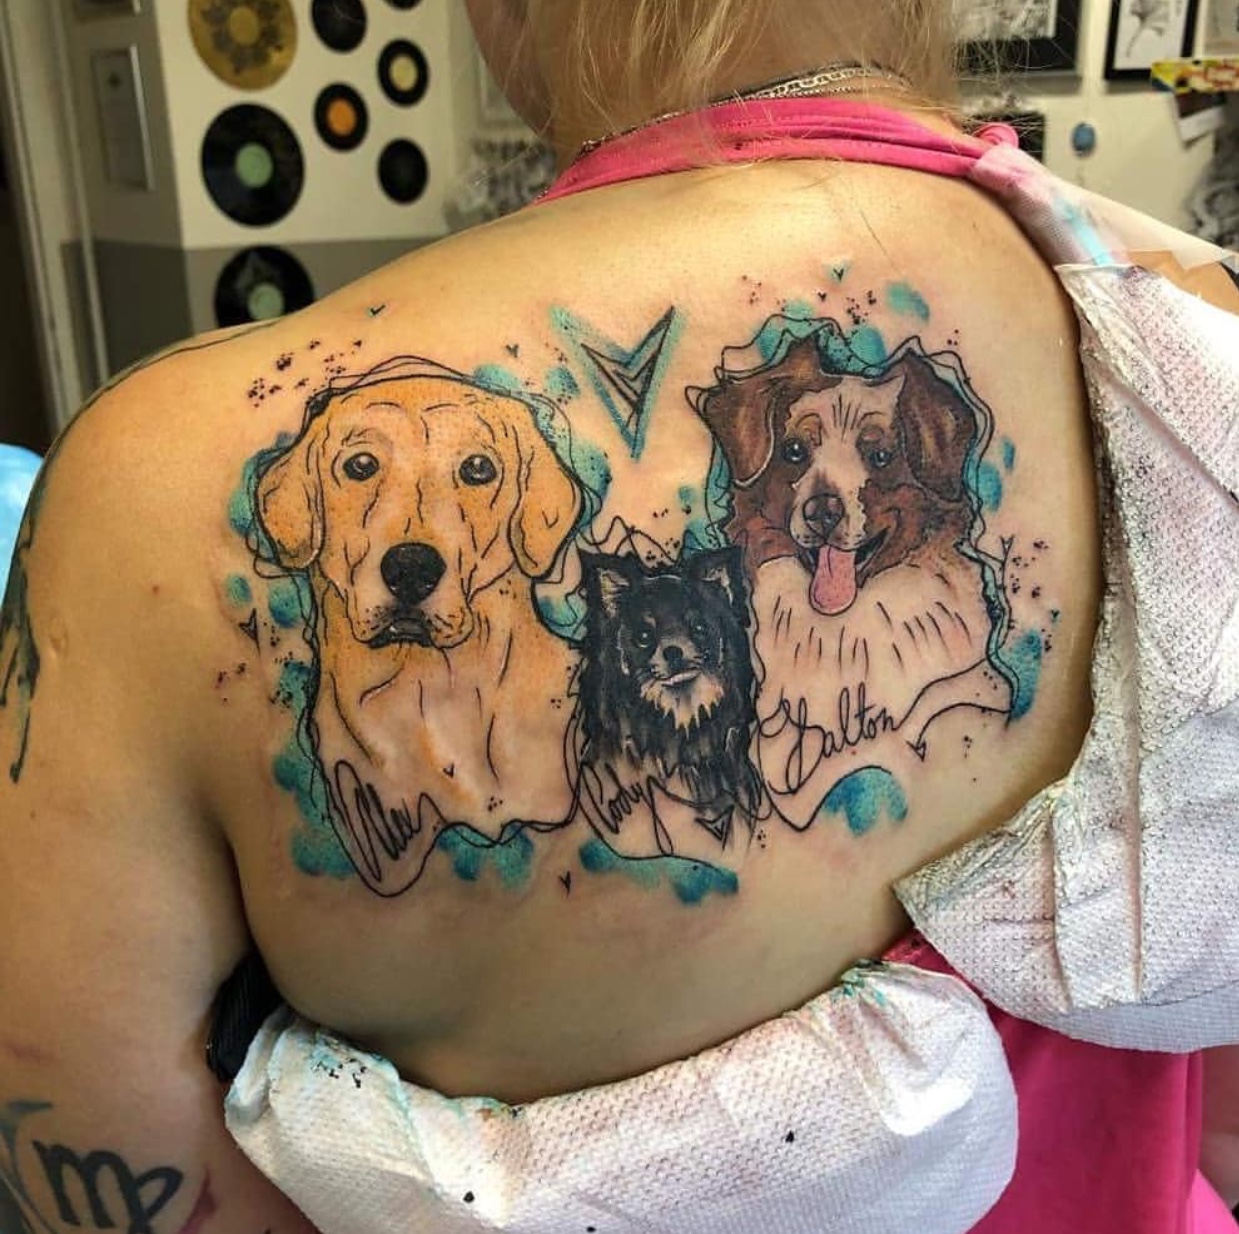 Artistic Labrador Retriever, chihuahua, and border collie tattoo on the back of a woman